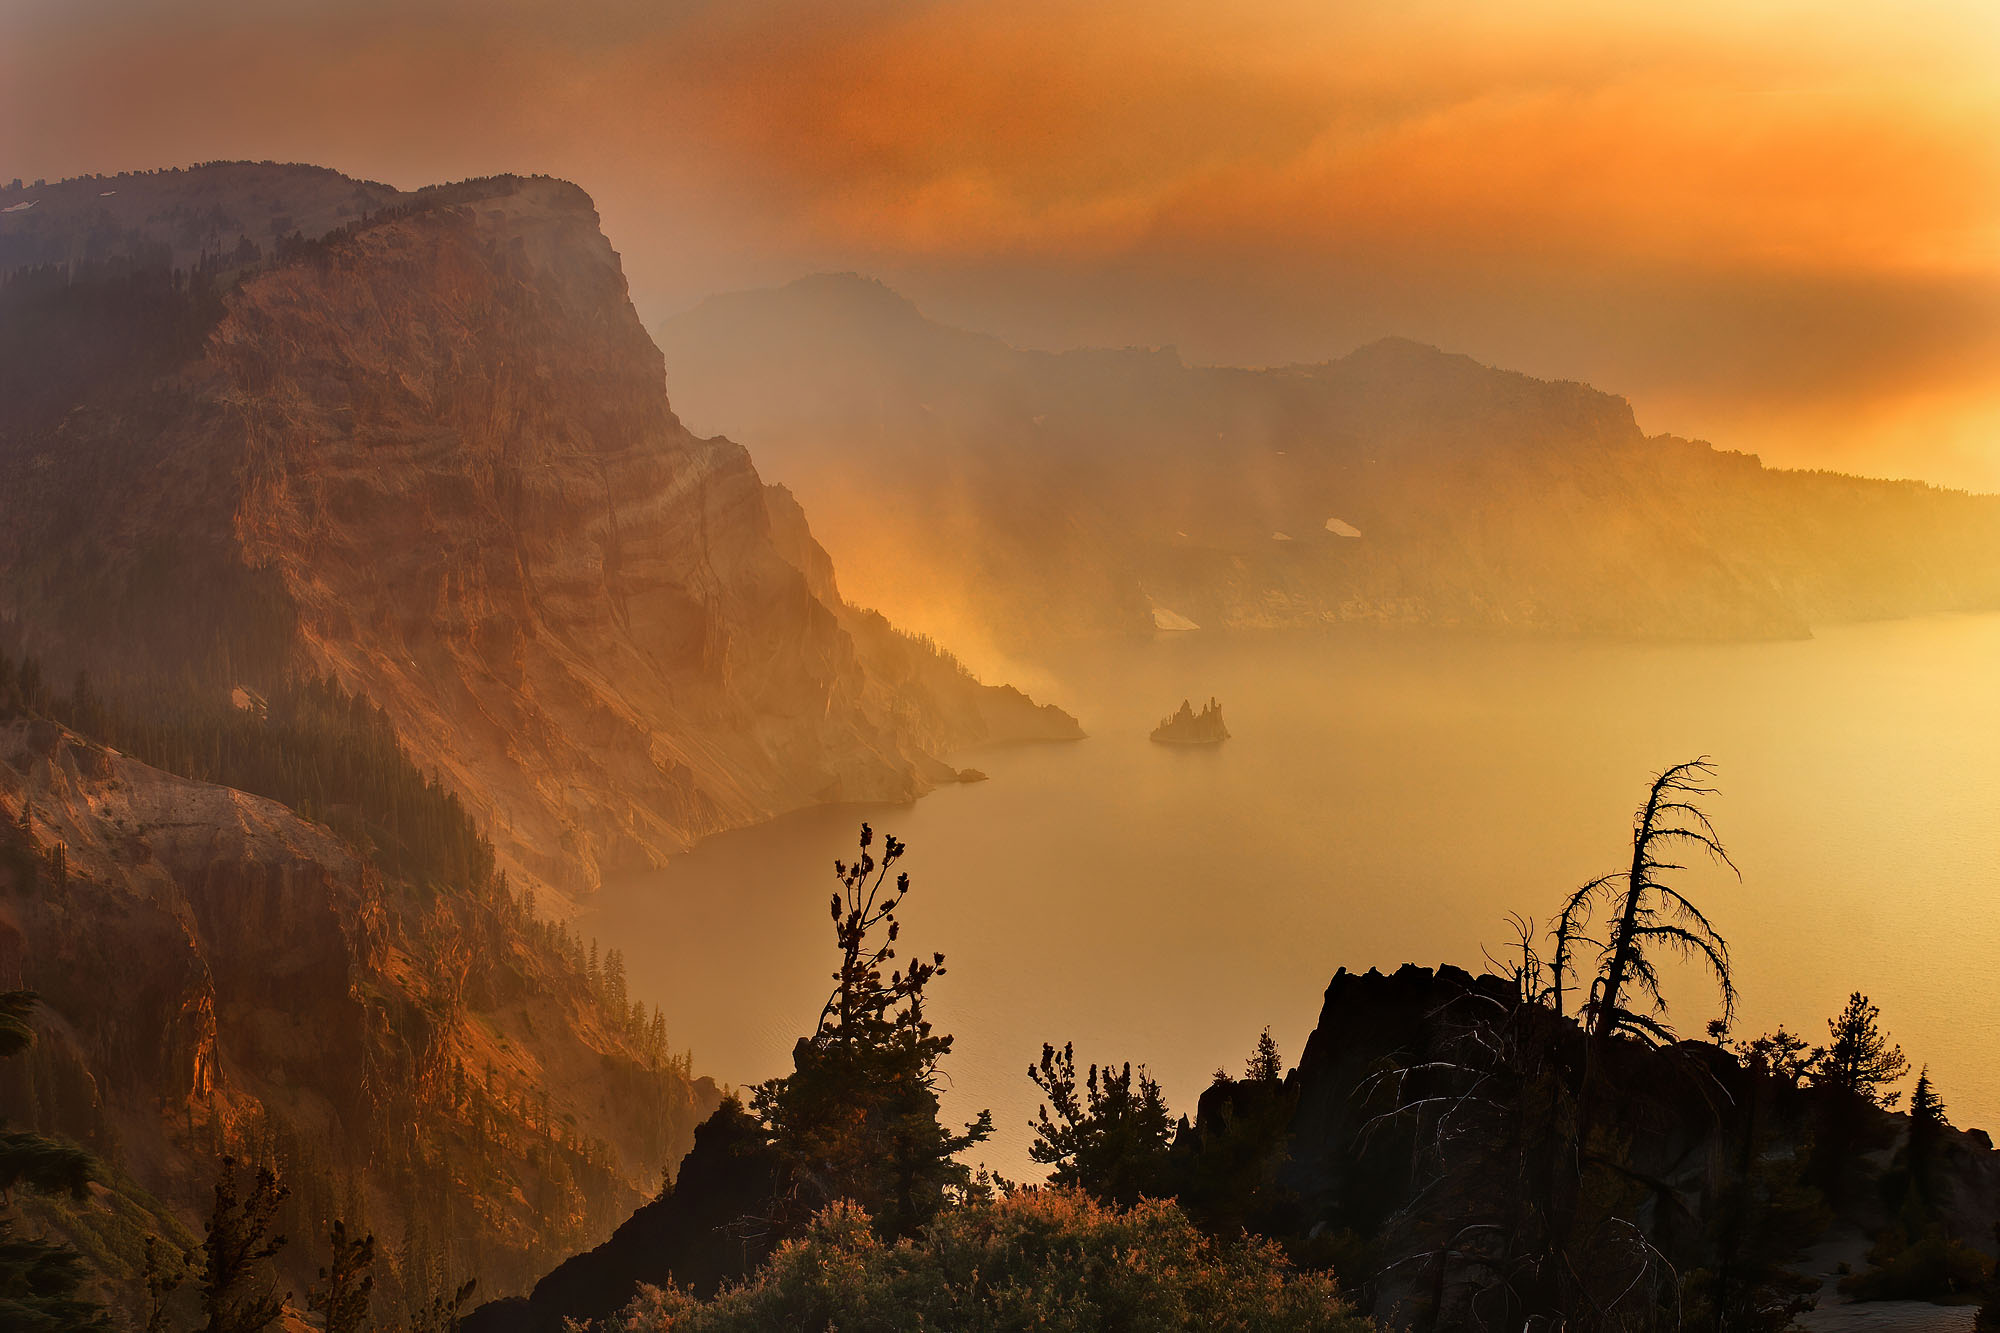 The Crater Lake volcanic caldera in the Cascade Range in Oregon is shrouded in the smoke of a wild fire ignited by lightning strike